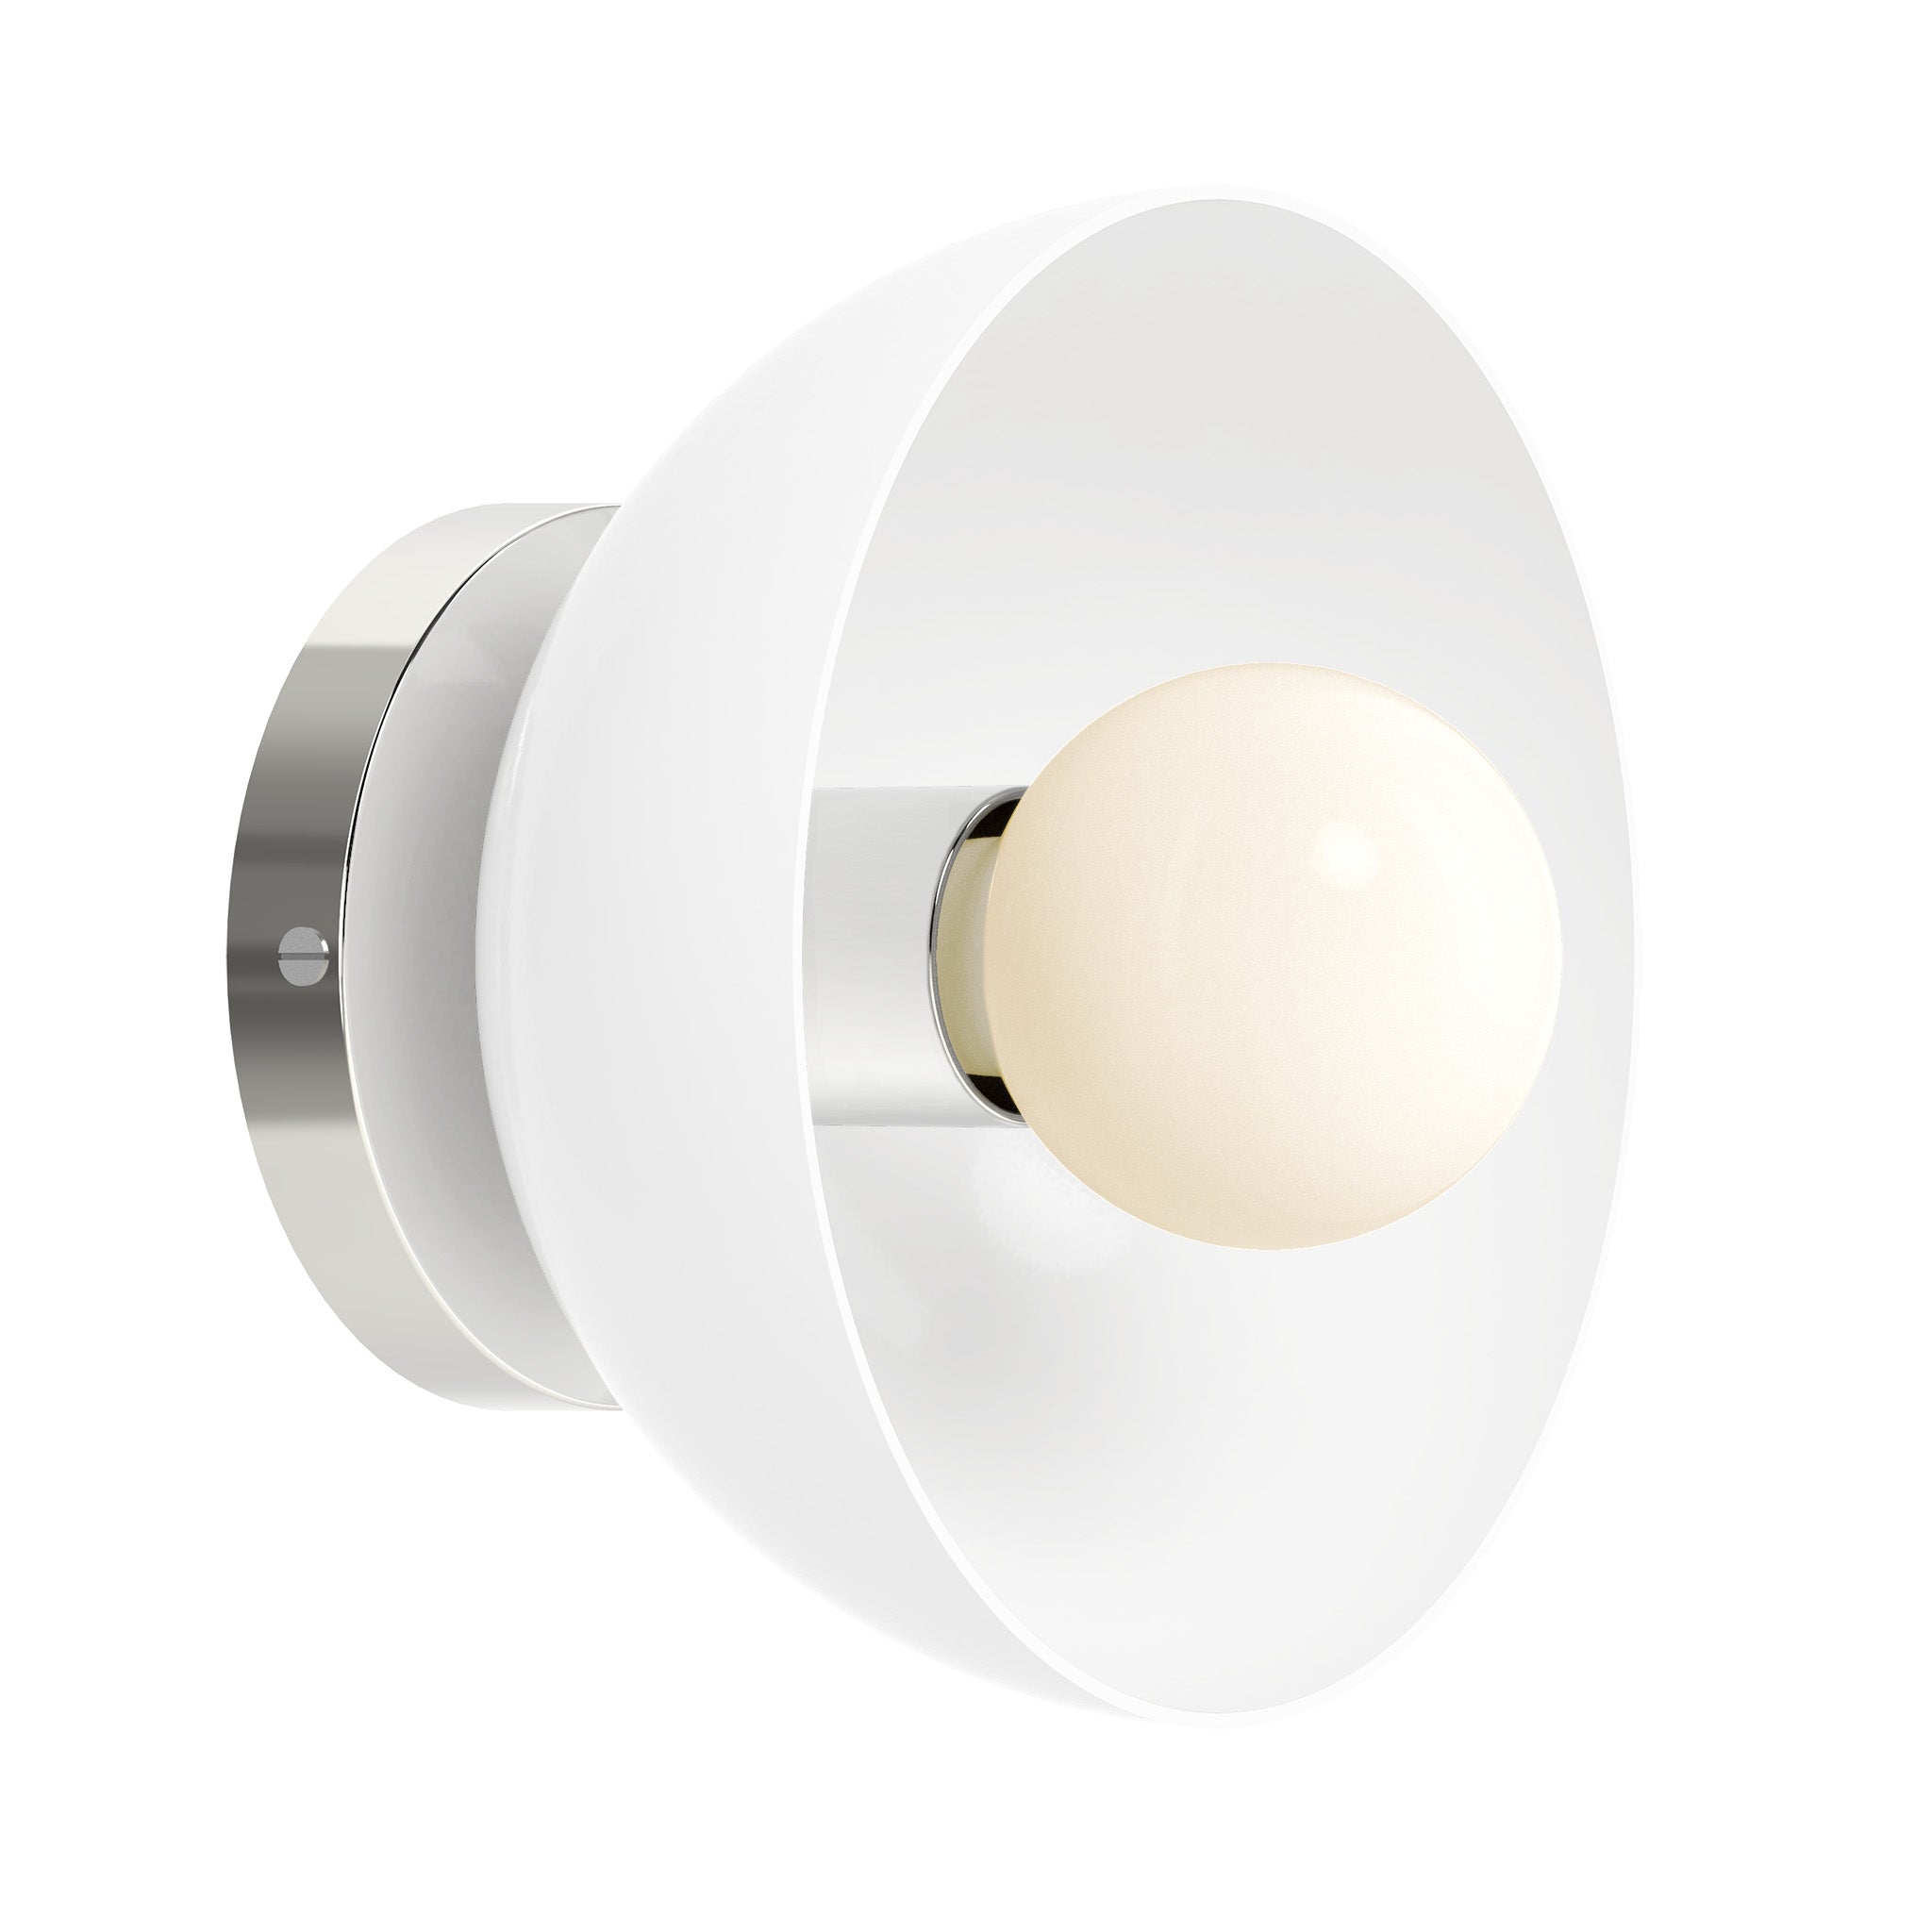 Nickel and white color Hemi sconce 8" Dutton Brown lighting